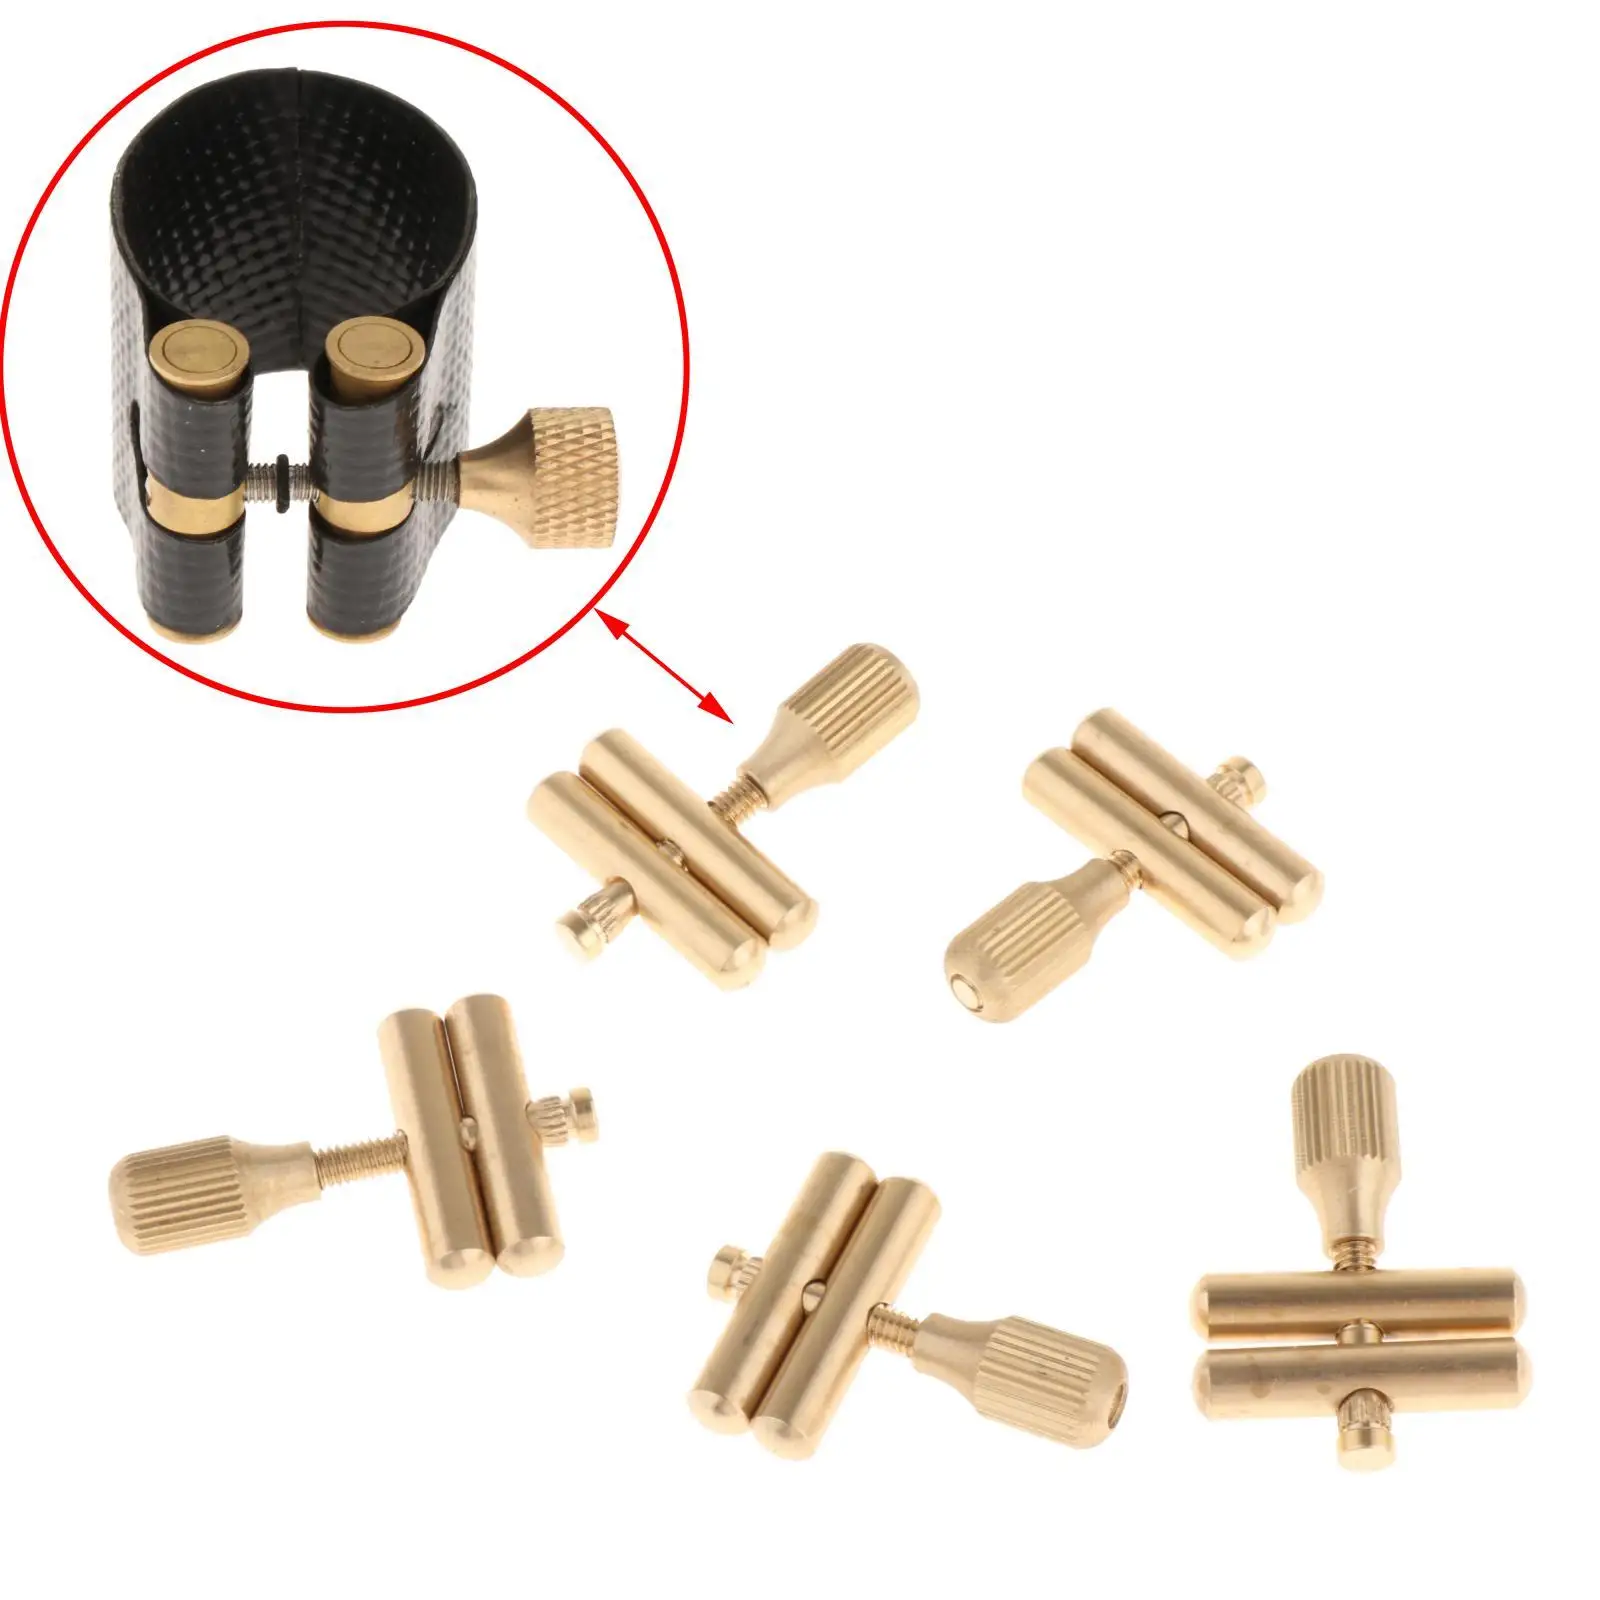 5 Pieces Sax Neck Screw Easy to Use Replacement Instrument Repair Tool for Soprano Alto Tenor Saxophone Instrument Accessory